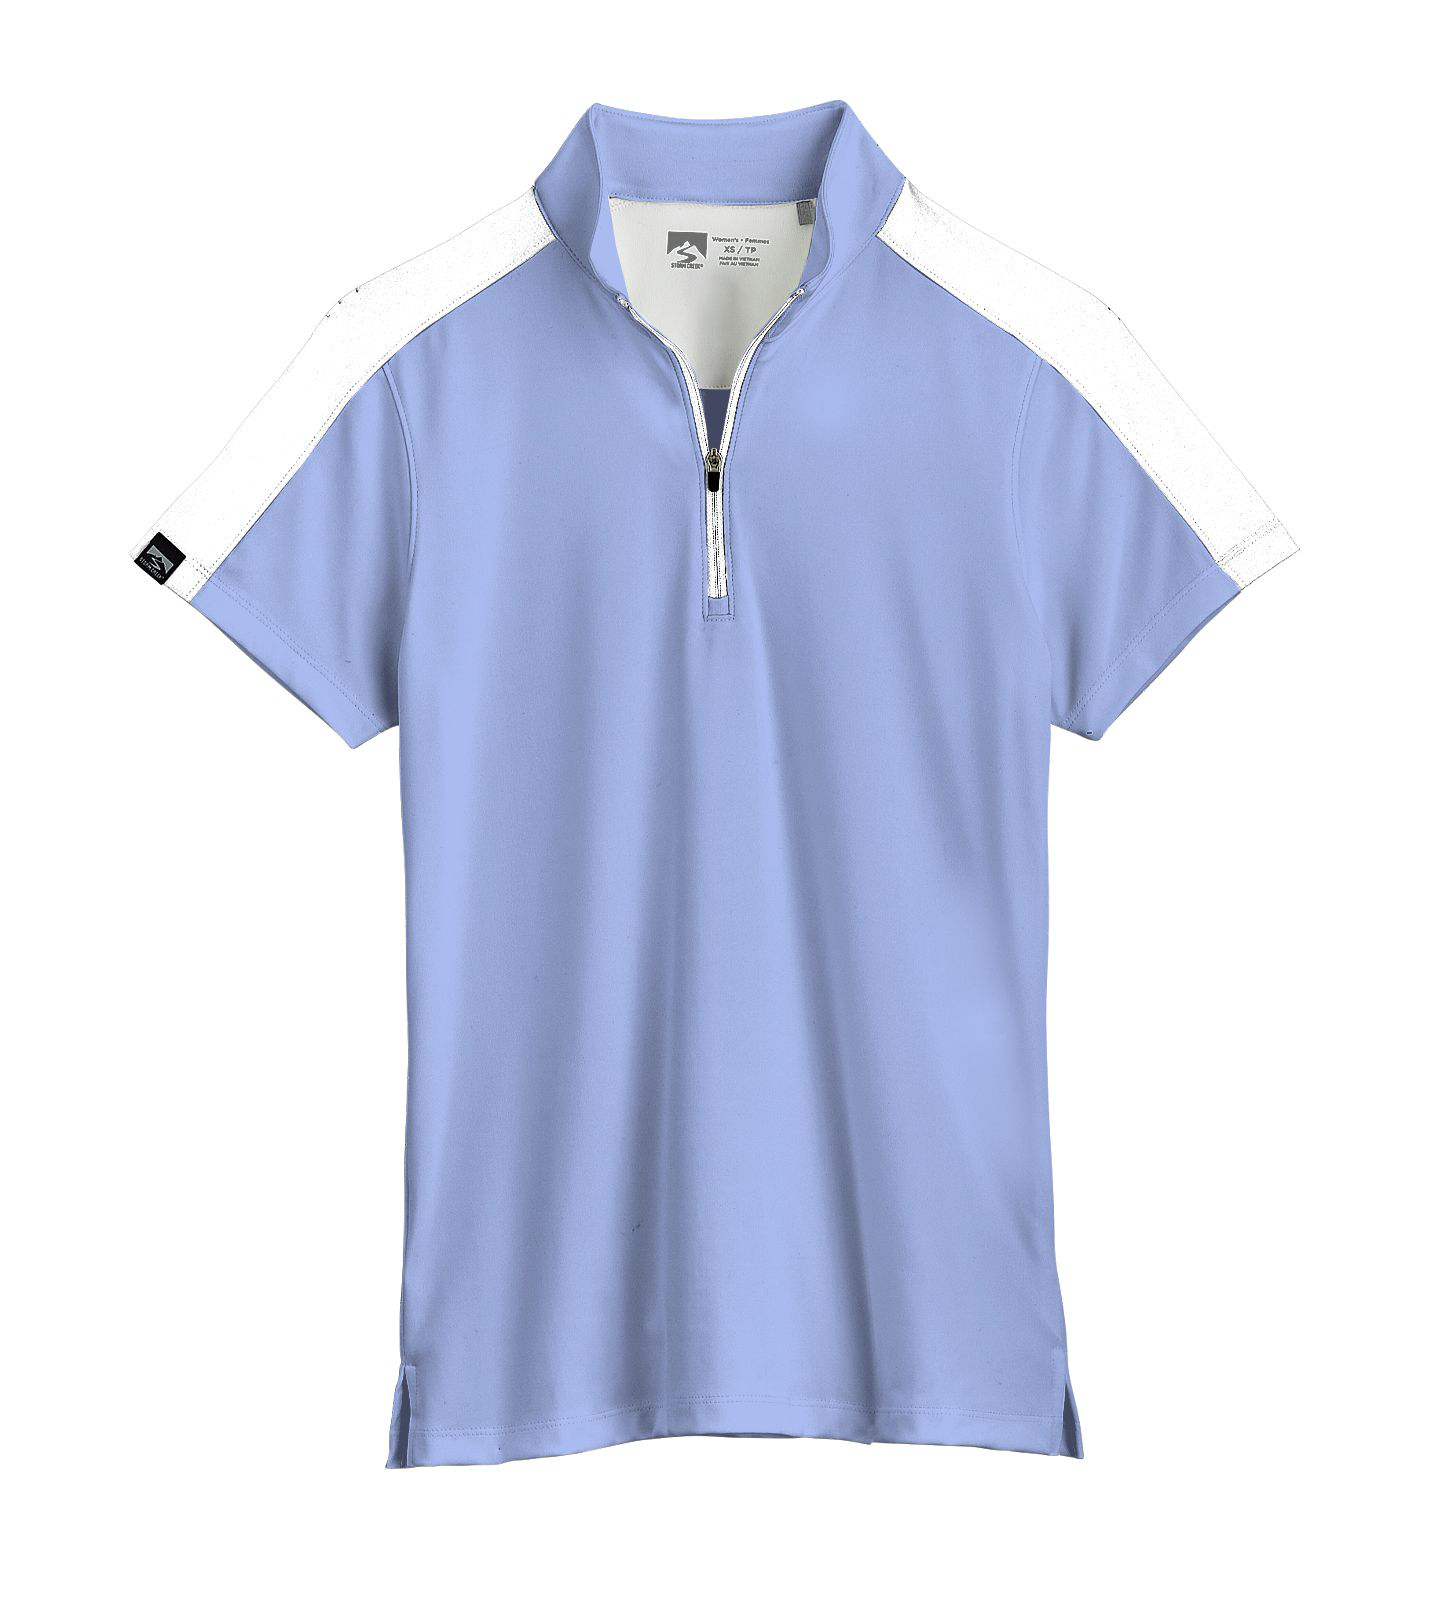 Storm Creek Activator Short-Sleeve Polo Shirt for Ladies - Peri Blue/White - XS